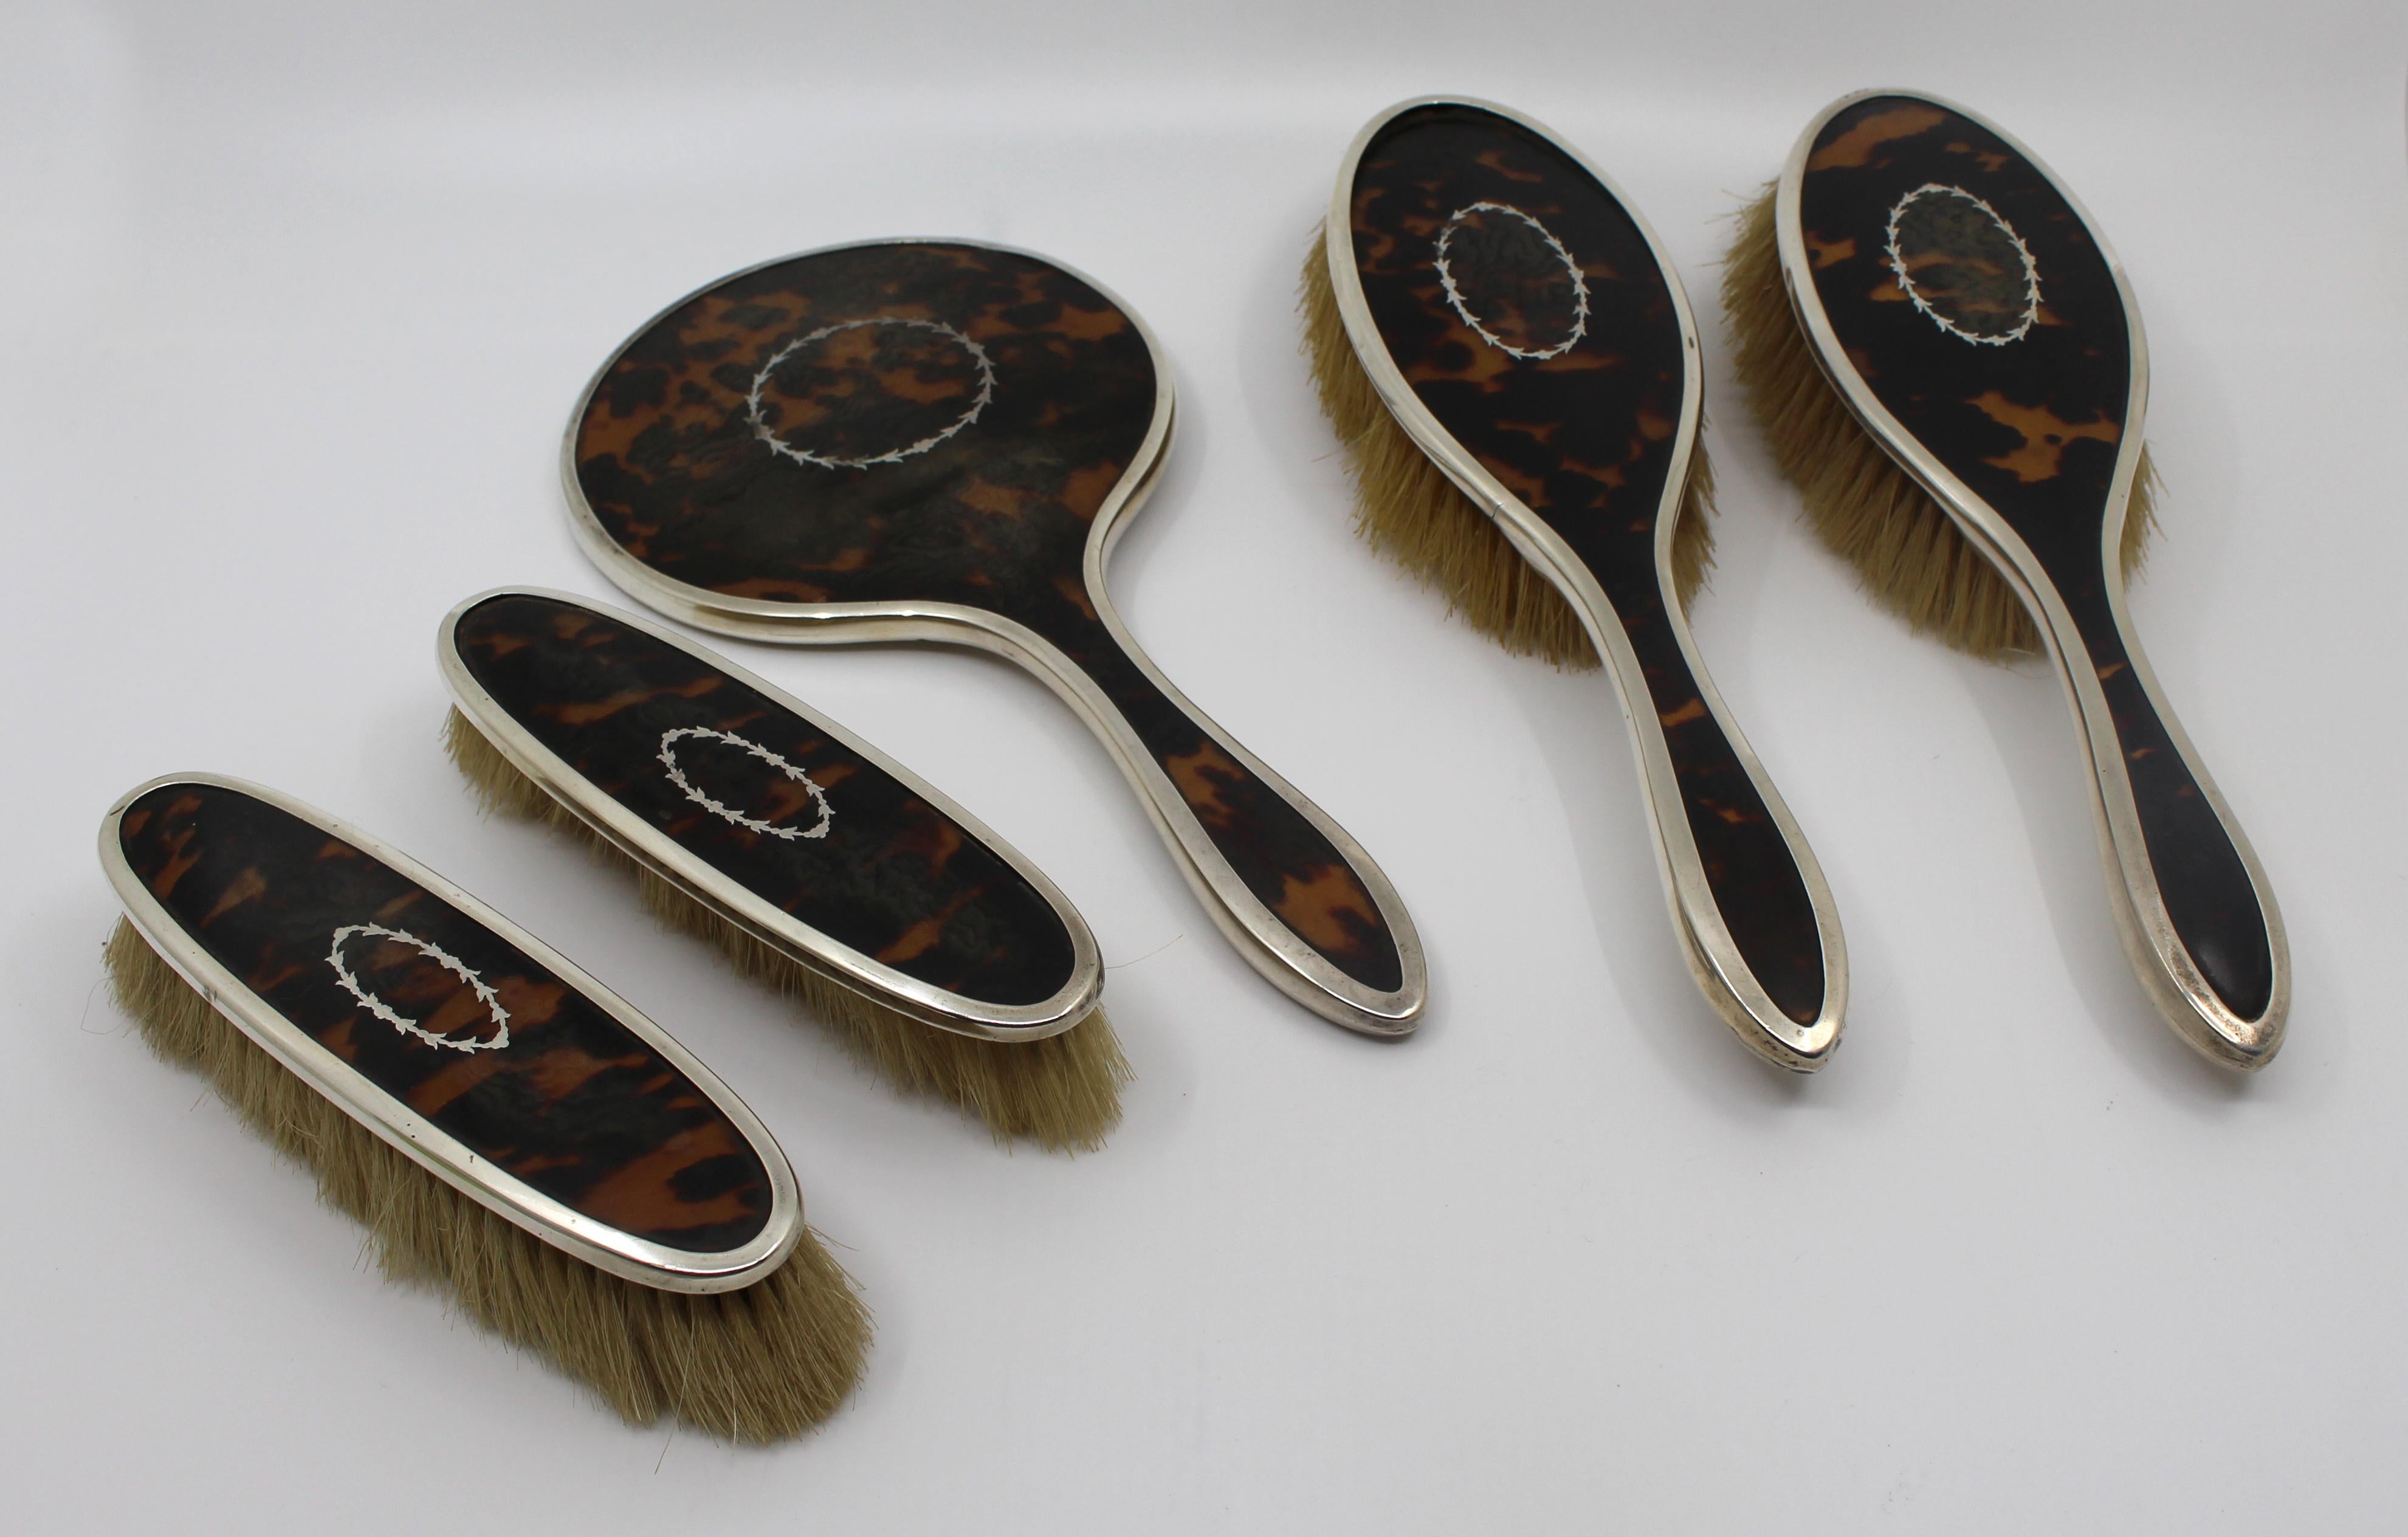 English five piece silver & Tortoiseshell Vanity brush set 1923


Period Early 20th century, English

Maker F H Adams & Co

Hallmark Birmingham, 1923

Pieces 5 pieces: pair of clothes brushes, vanity mirror & pair of hair brushes
